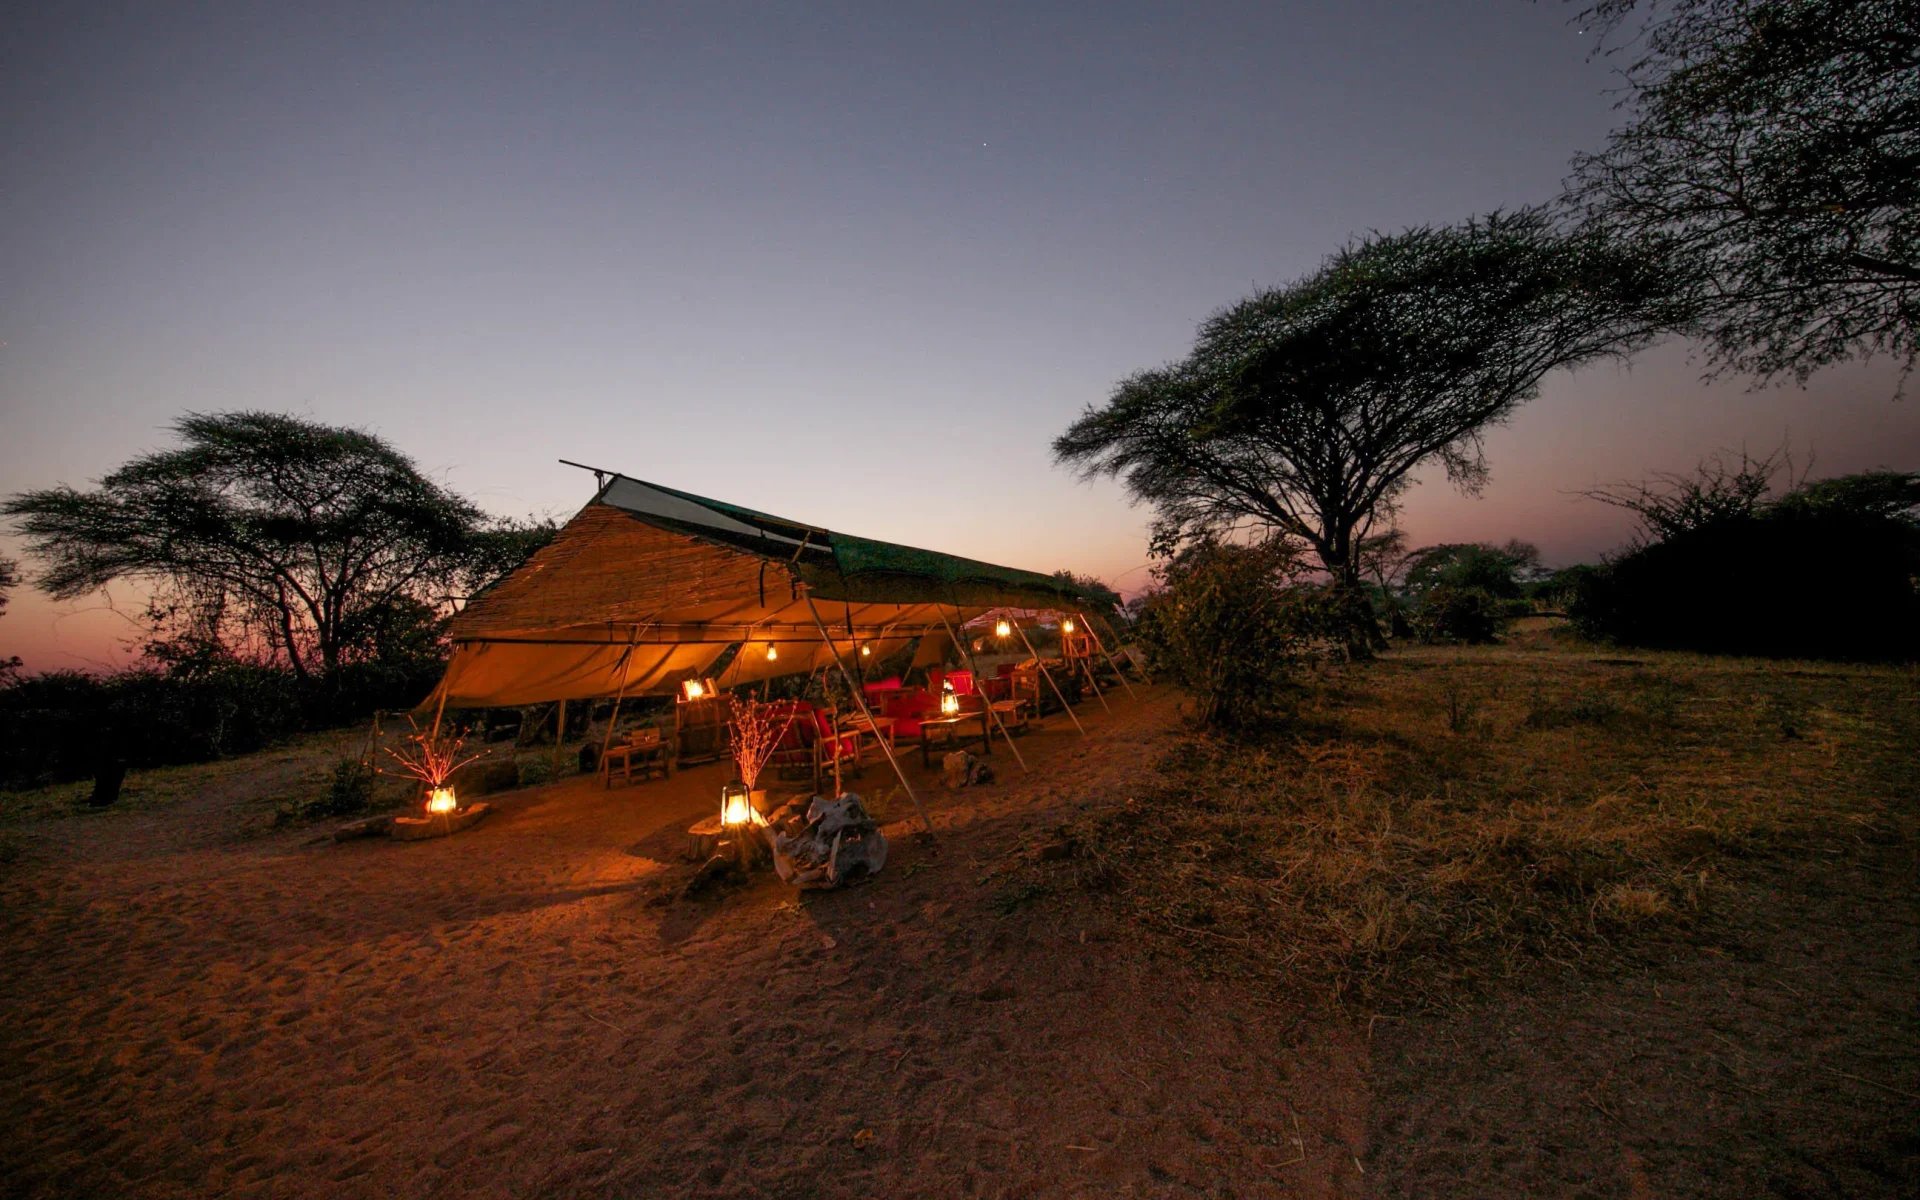 The communal tent is lit up by lamps and candles during the early evening at Mdonya Old River Camp as the sky is filled with soft blues and pinks.